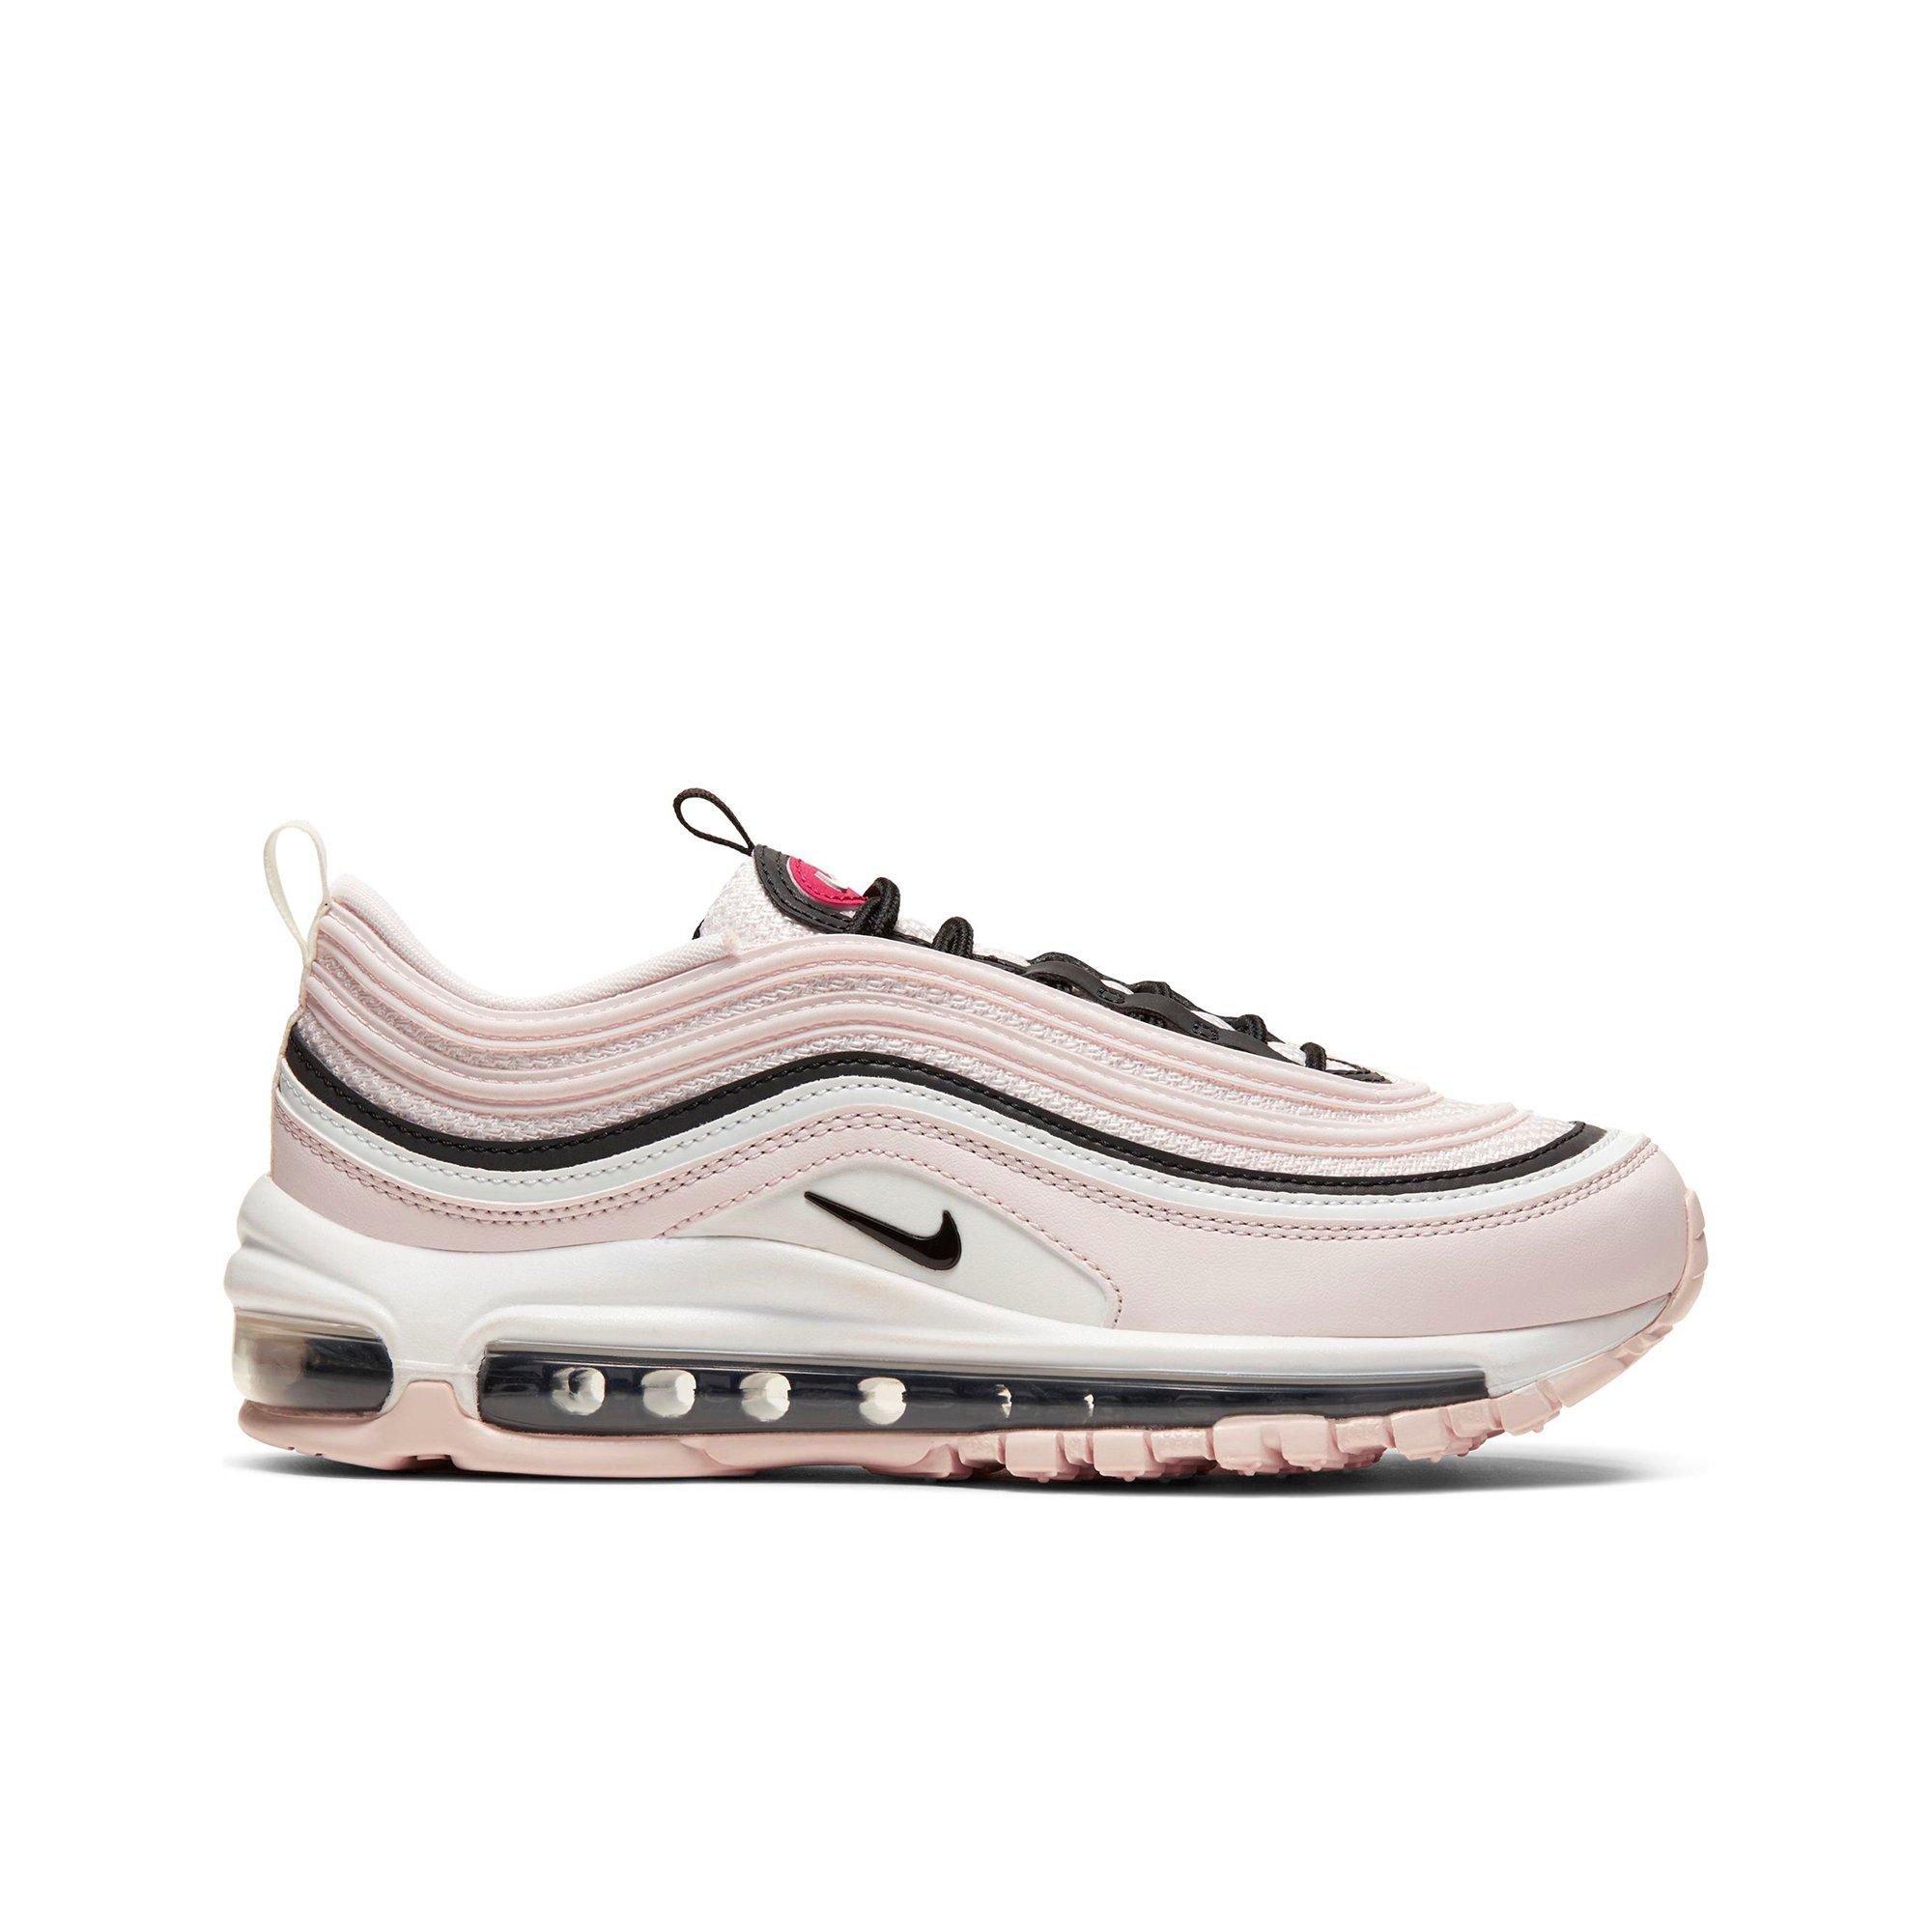 white pink and black air max